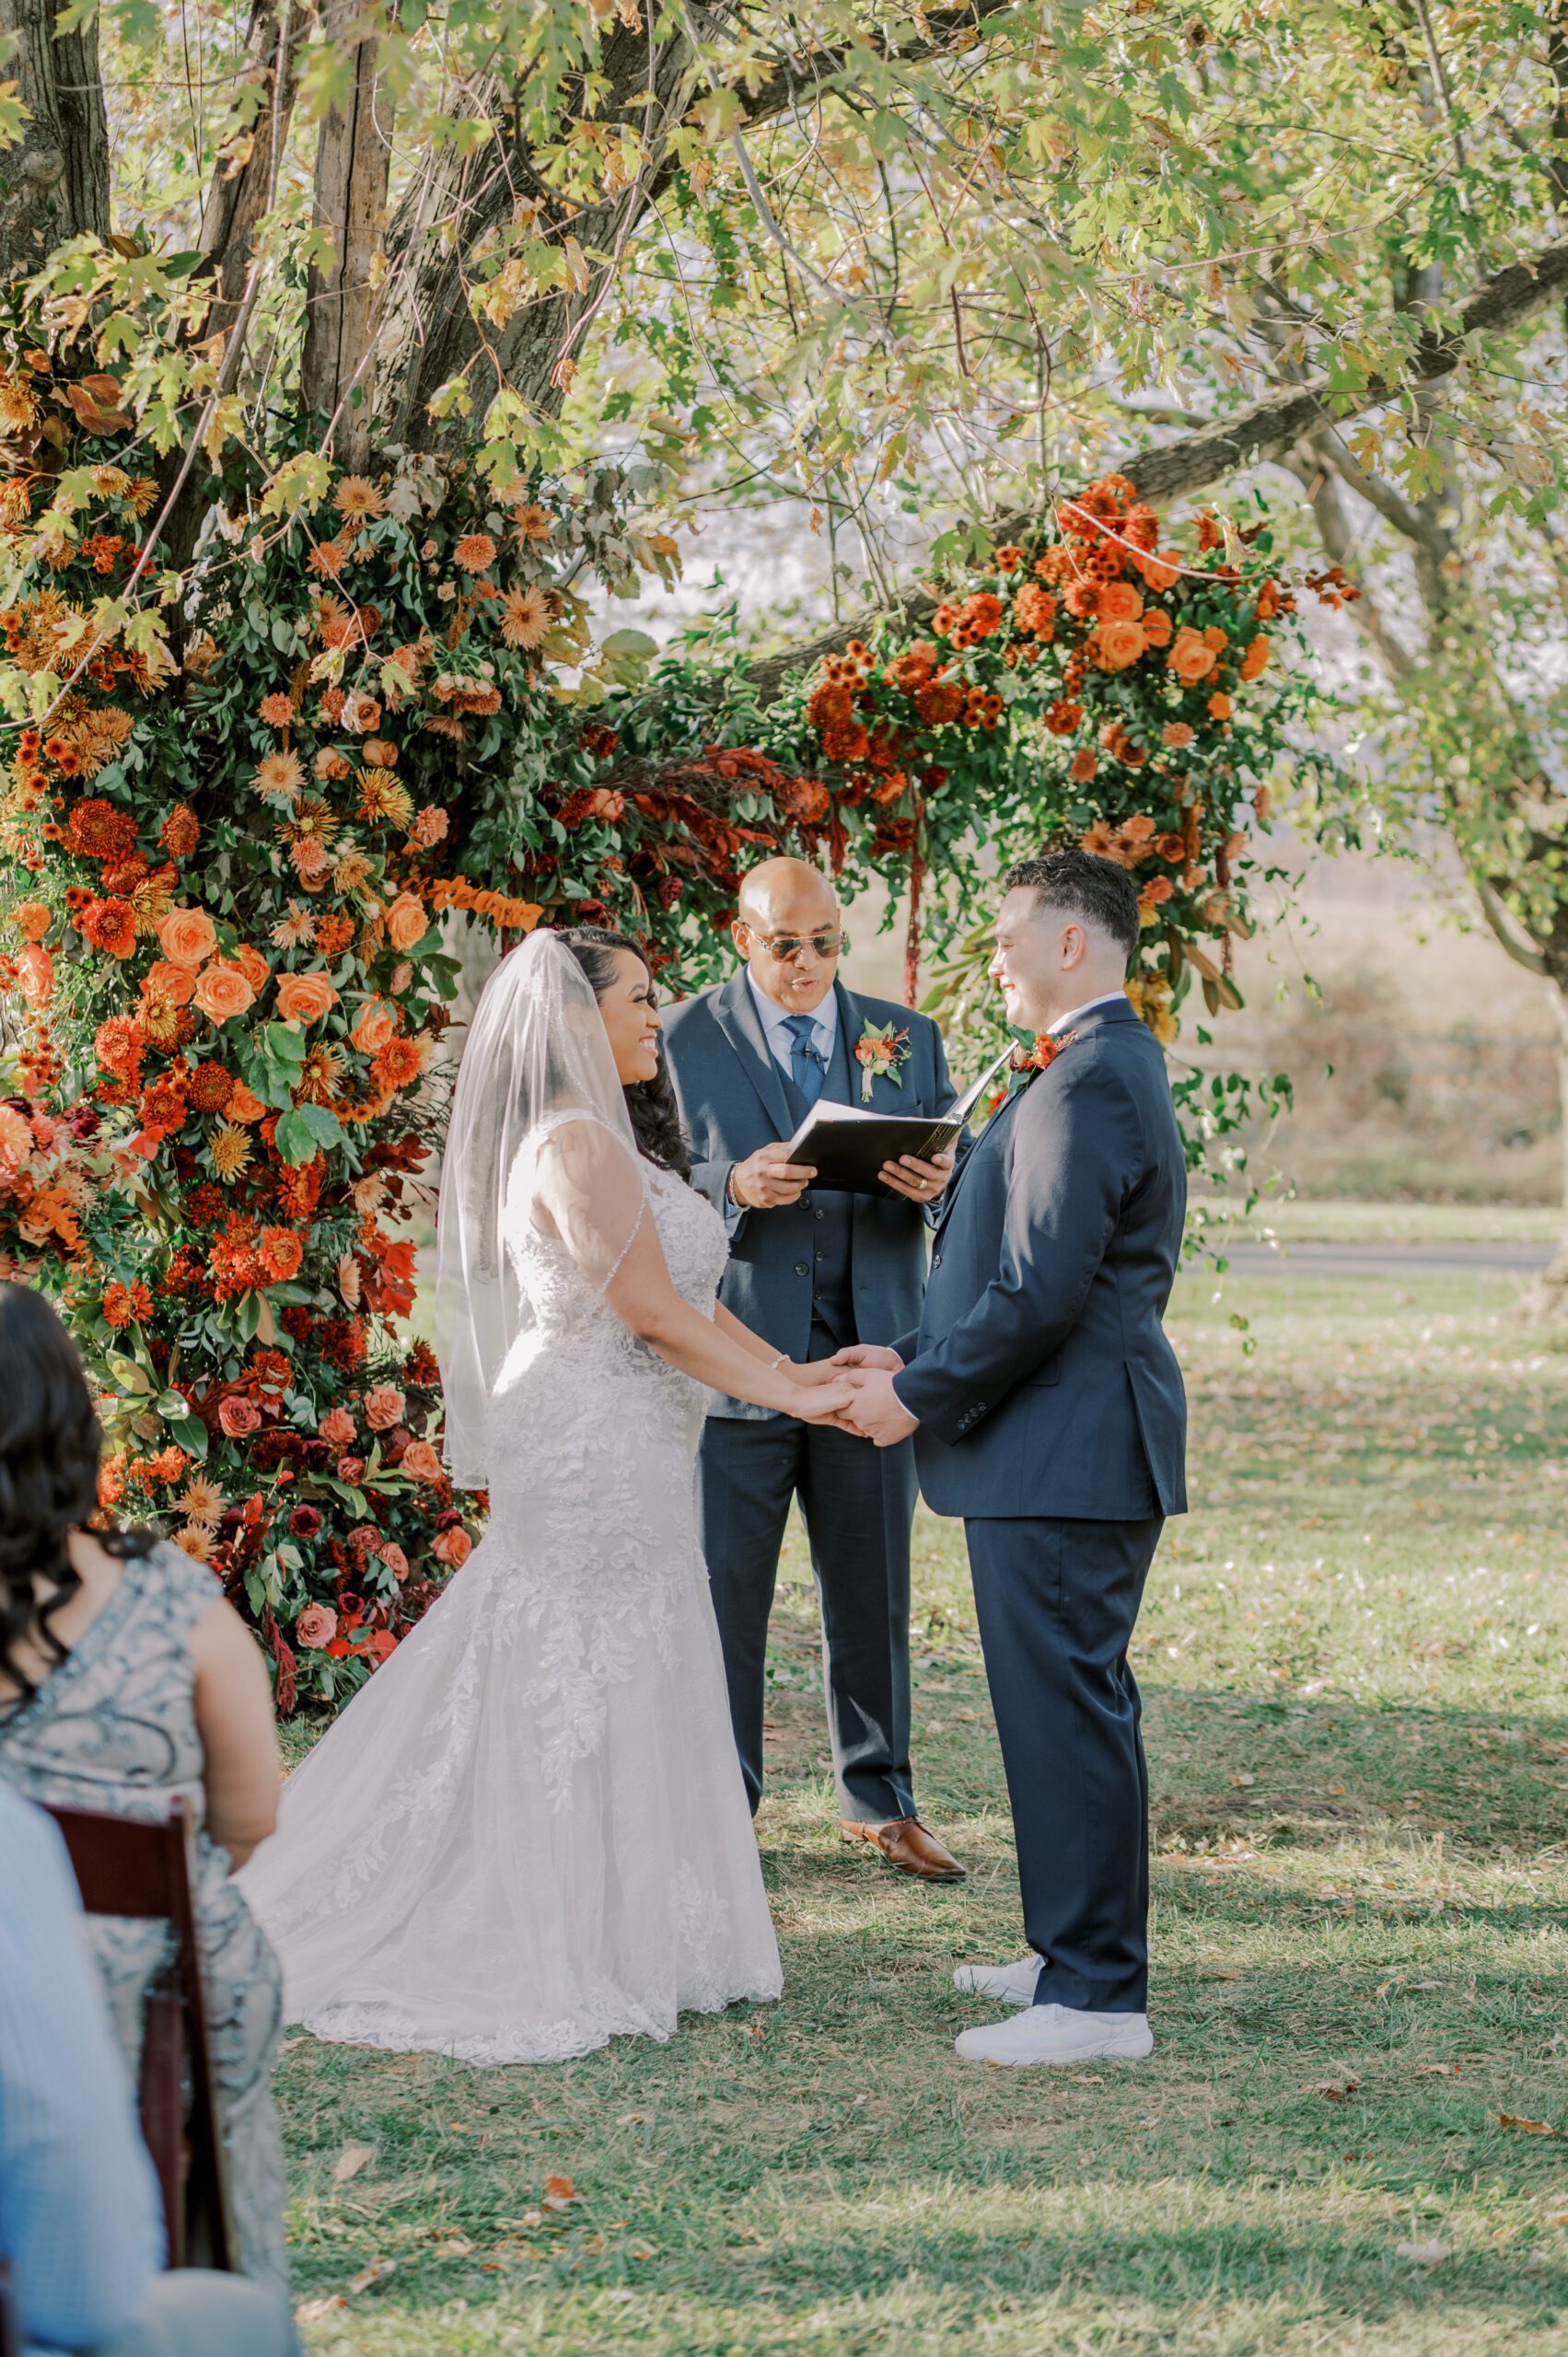 Bride and groom holding hands smiling at one another, tree covered in tons of red and orange flowers behind them